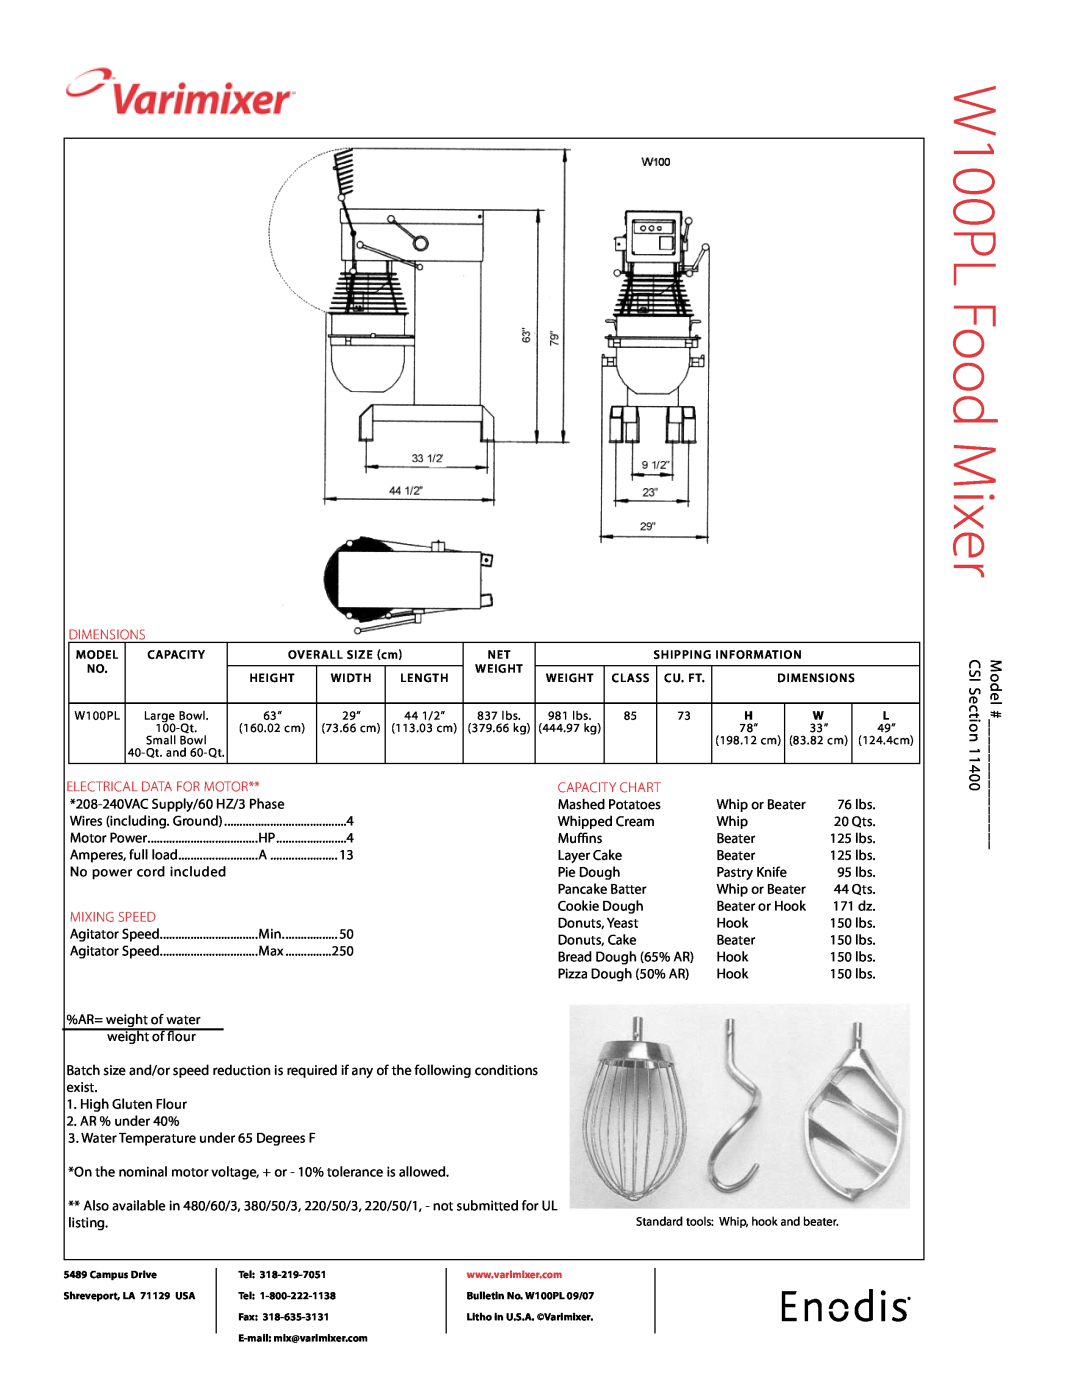 Varimixer specifications W100PL Food Mixer, dimensions, electrical data for motor, capacity chart, mixing speed, listing 